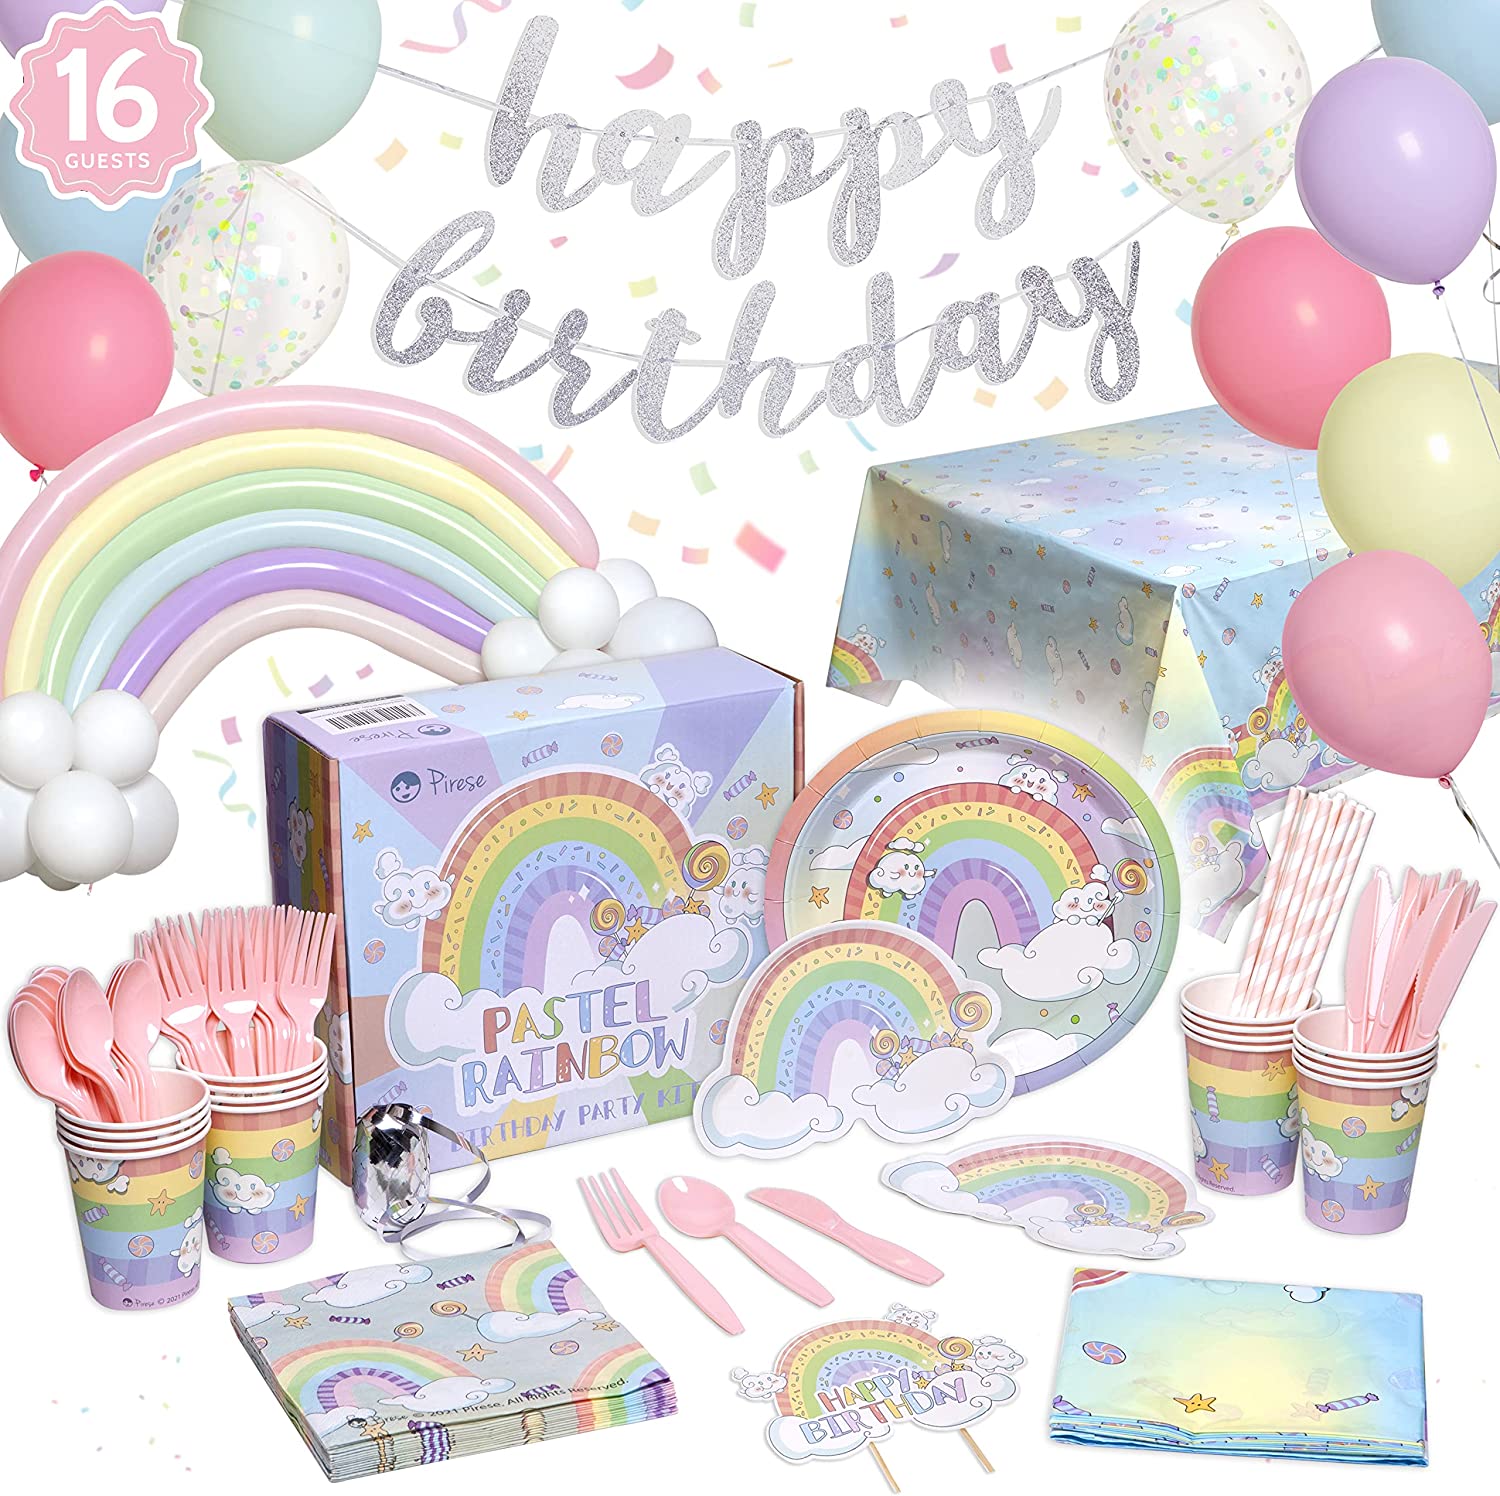 Unicorn Birthday Party Supplies - 16 Guests Unicorn Party Supplies